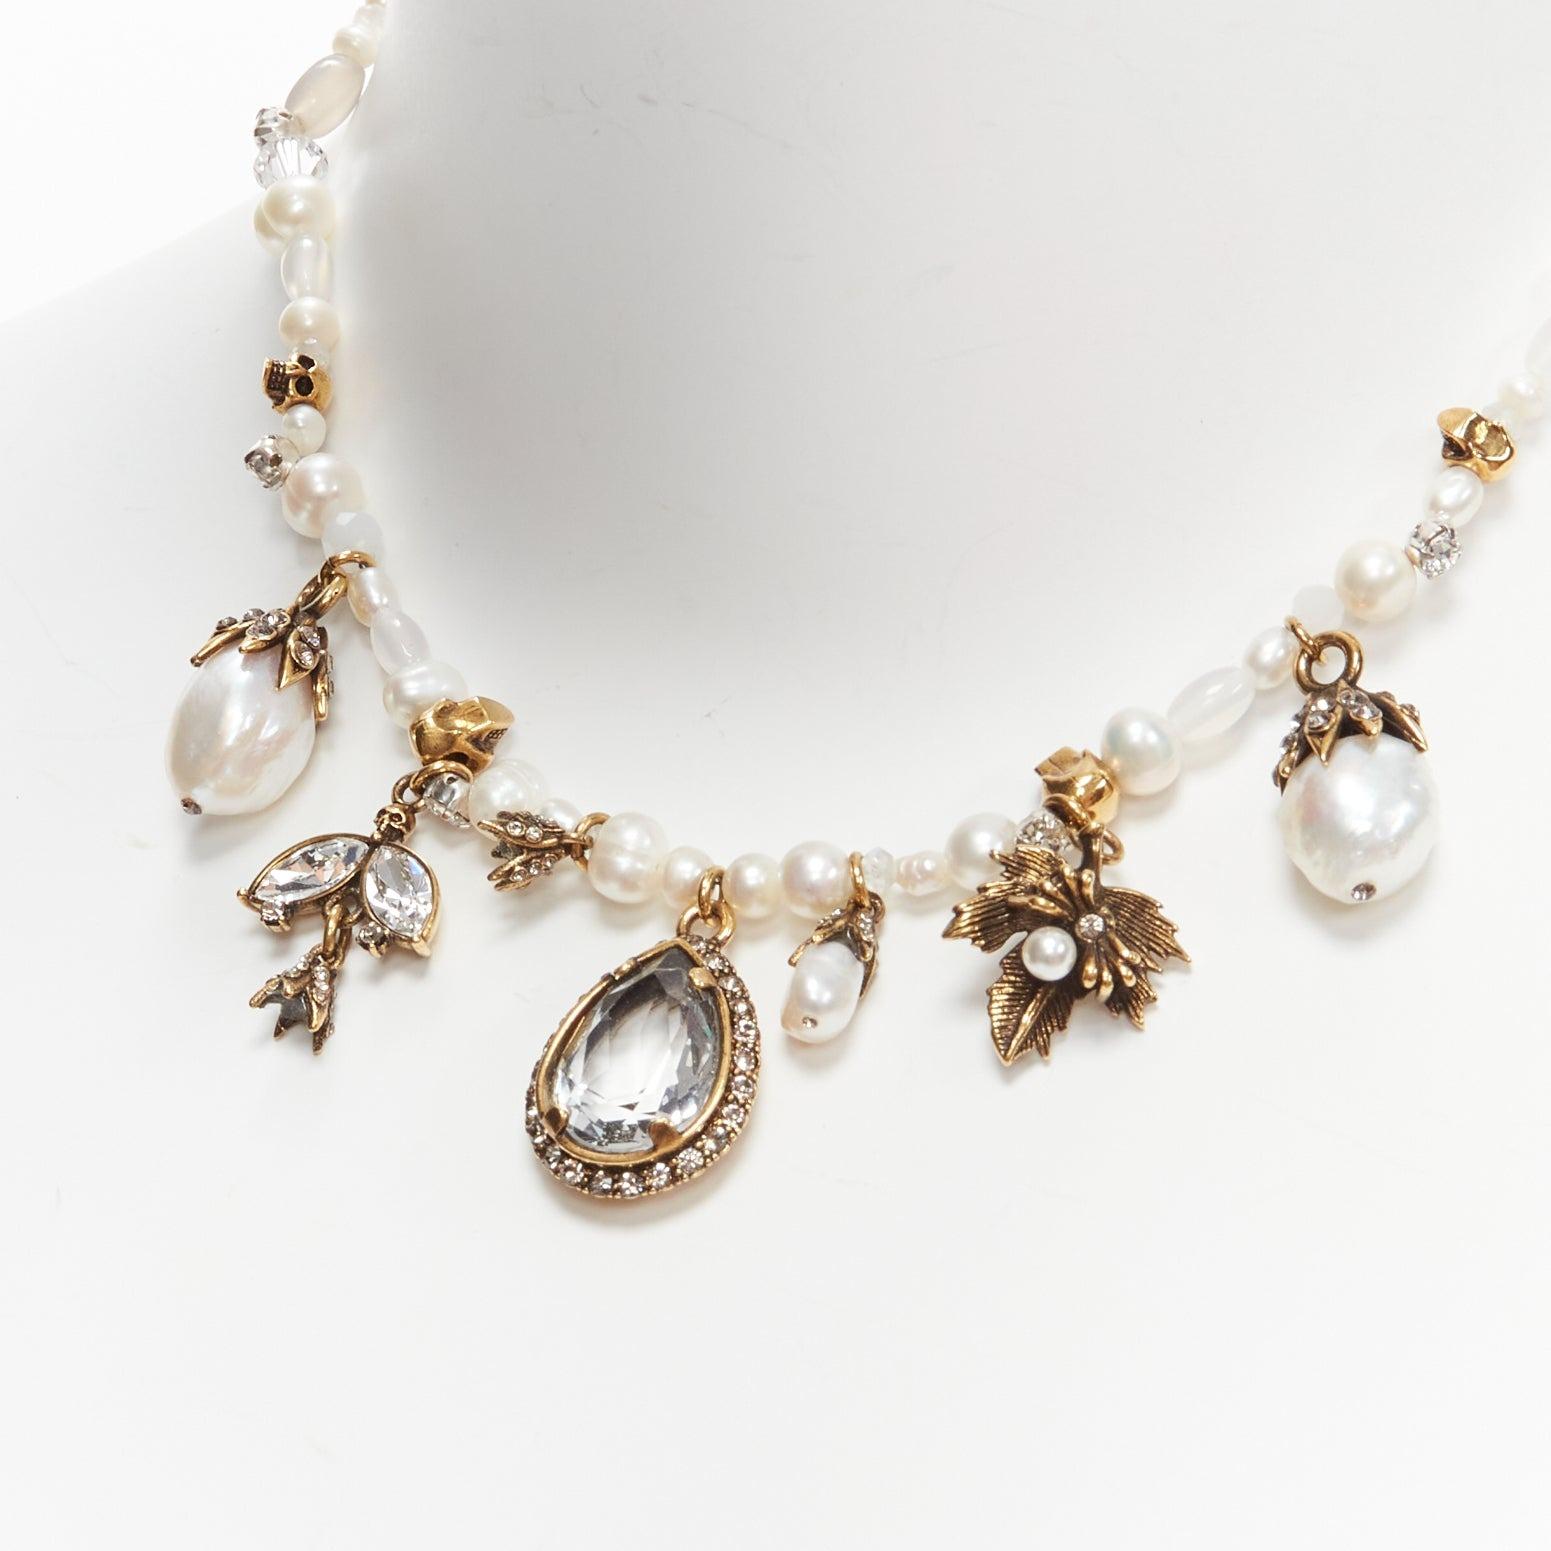 ALEXANDER MCQUEEN faux pearl gold jewel charm short necklace
Reference: TGAS/D00706
Brand: Alexander McQueen
Designer: Sarah Burton
Material: Metal, Faux Pearl
Color: Pearl, Bronze
Pattern: Solid
Closure: Lobster Clasp
Lining: Bronze Metal
Extra